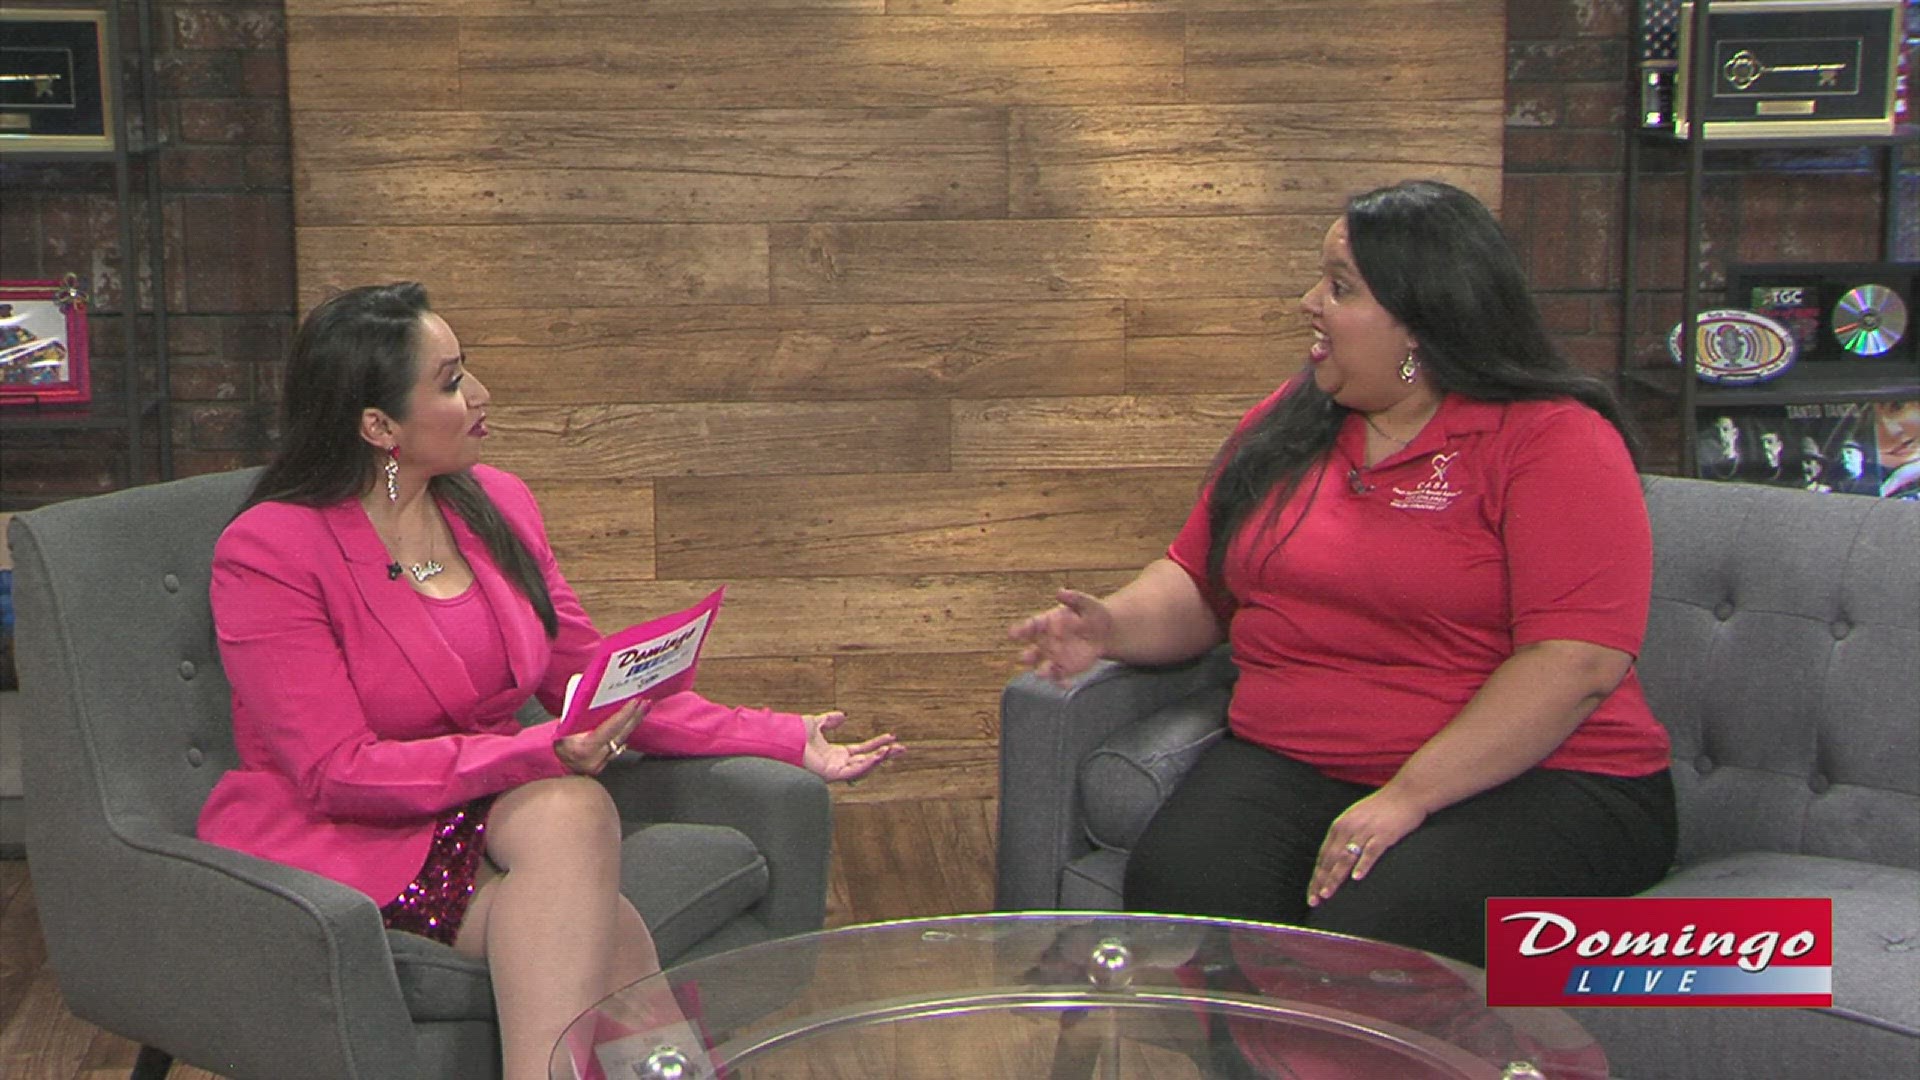 Brush Country CASA's Nicole Ortegon joined us on Domingo Live to tell the public how they can support local children by joining their colorful 5K benefit run.